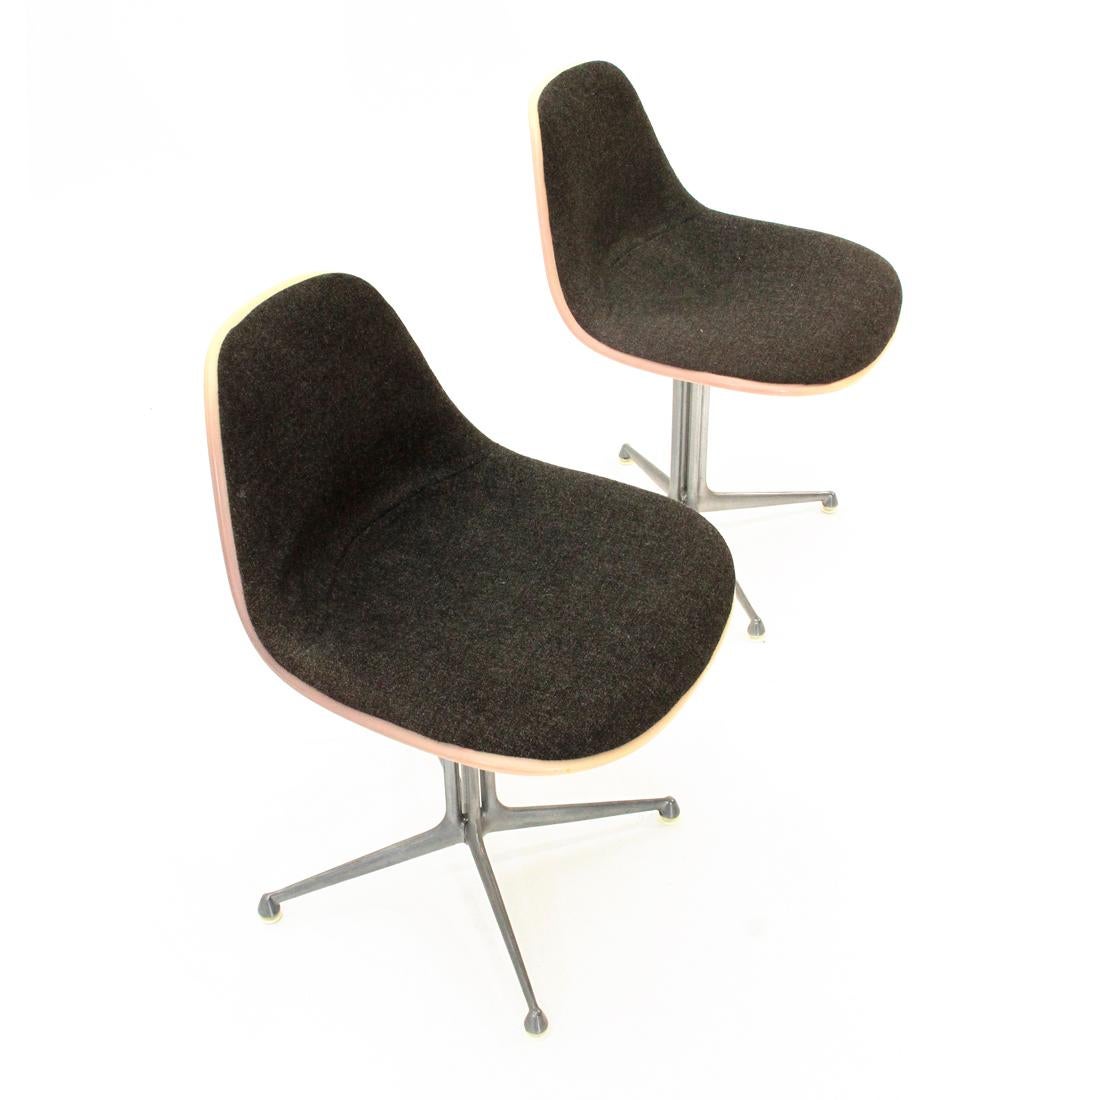 2 chairs produced in the 1960s by Herman Miller based on a design by Charles & Ray Eames.
Made with a polished die-cast aluminum base.
Plastic shell, seat padded with polyurethane foam and covered with fabric.
Good general condition, halo on one